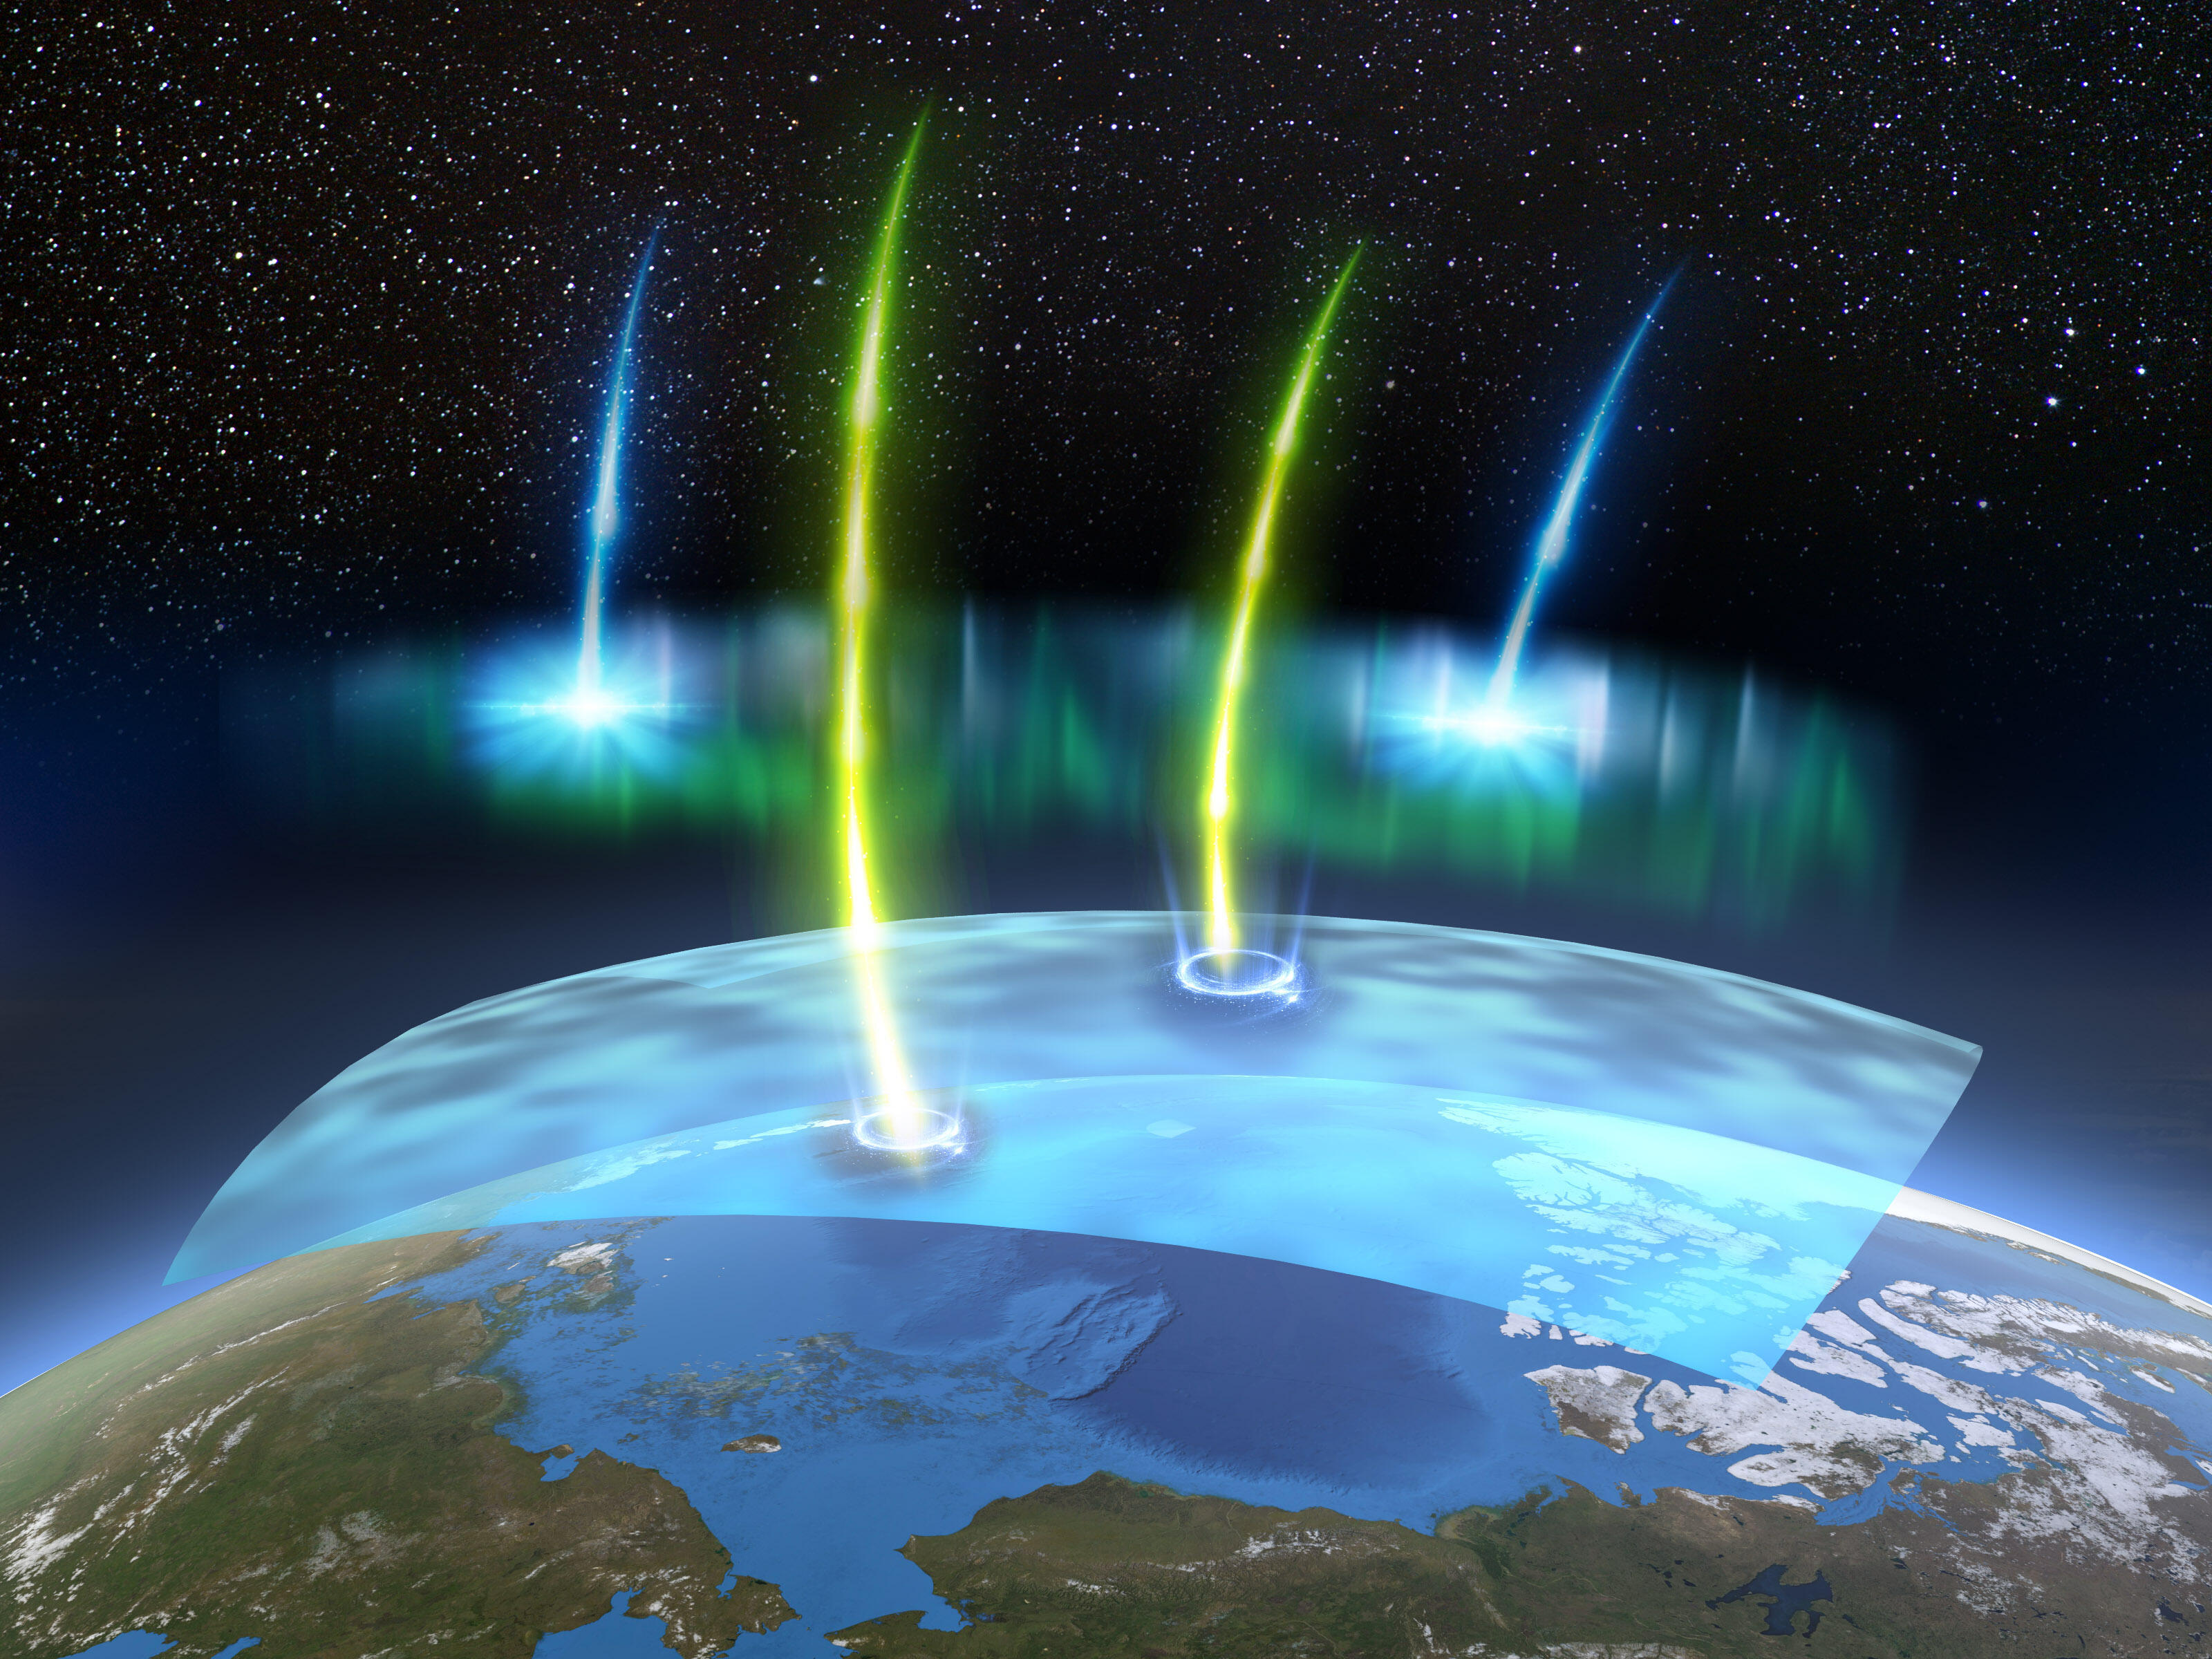 Low-energy (blue) and high-energy (yellow) electrons form during the process that generates the pulsating aurora. The high-energy ‘relativistic’ electrons could cause localized destruction of the ozone. (Credit: PsA project)